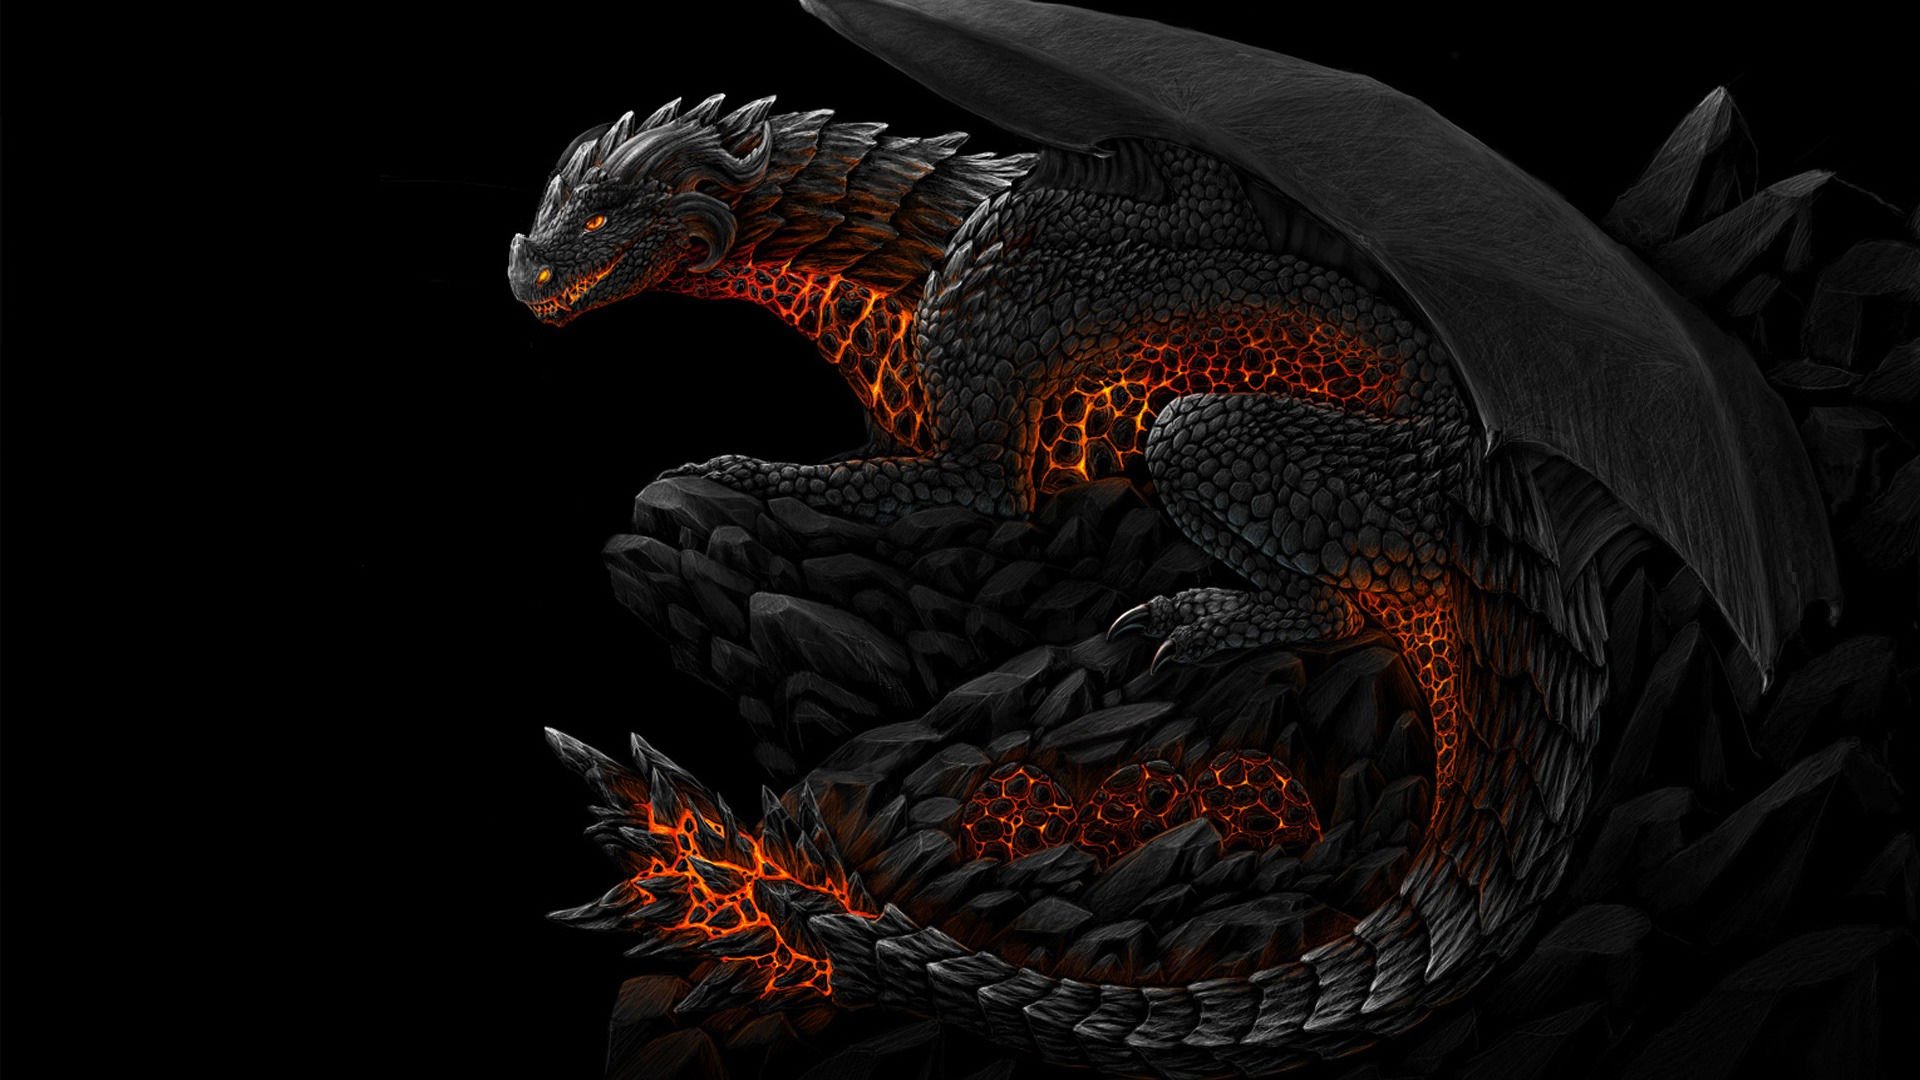 Wallpapers For Cool Backgrounds Of Dragons DRAGONS